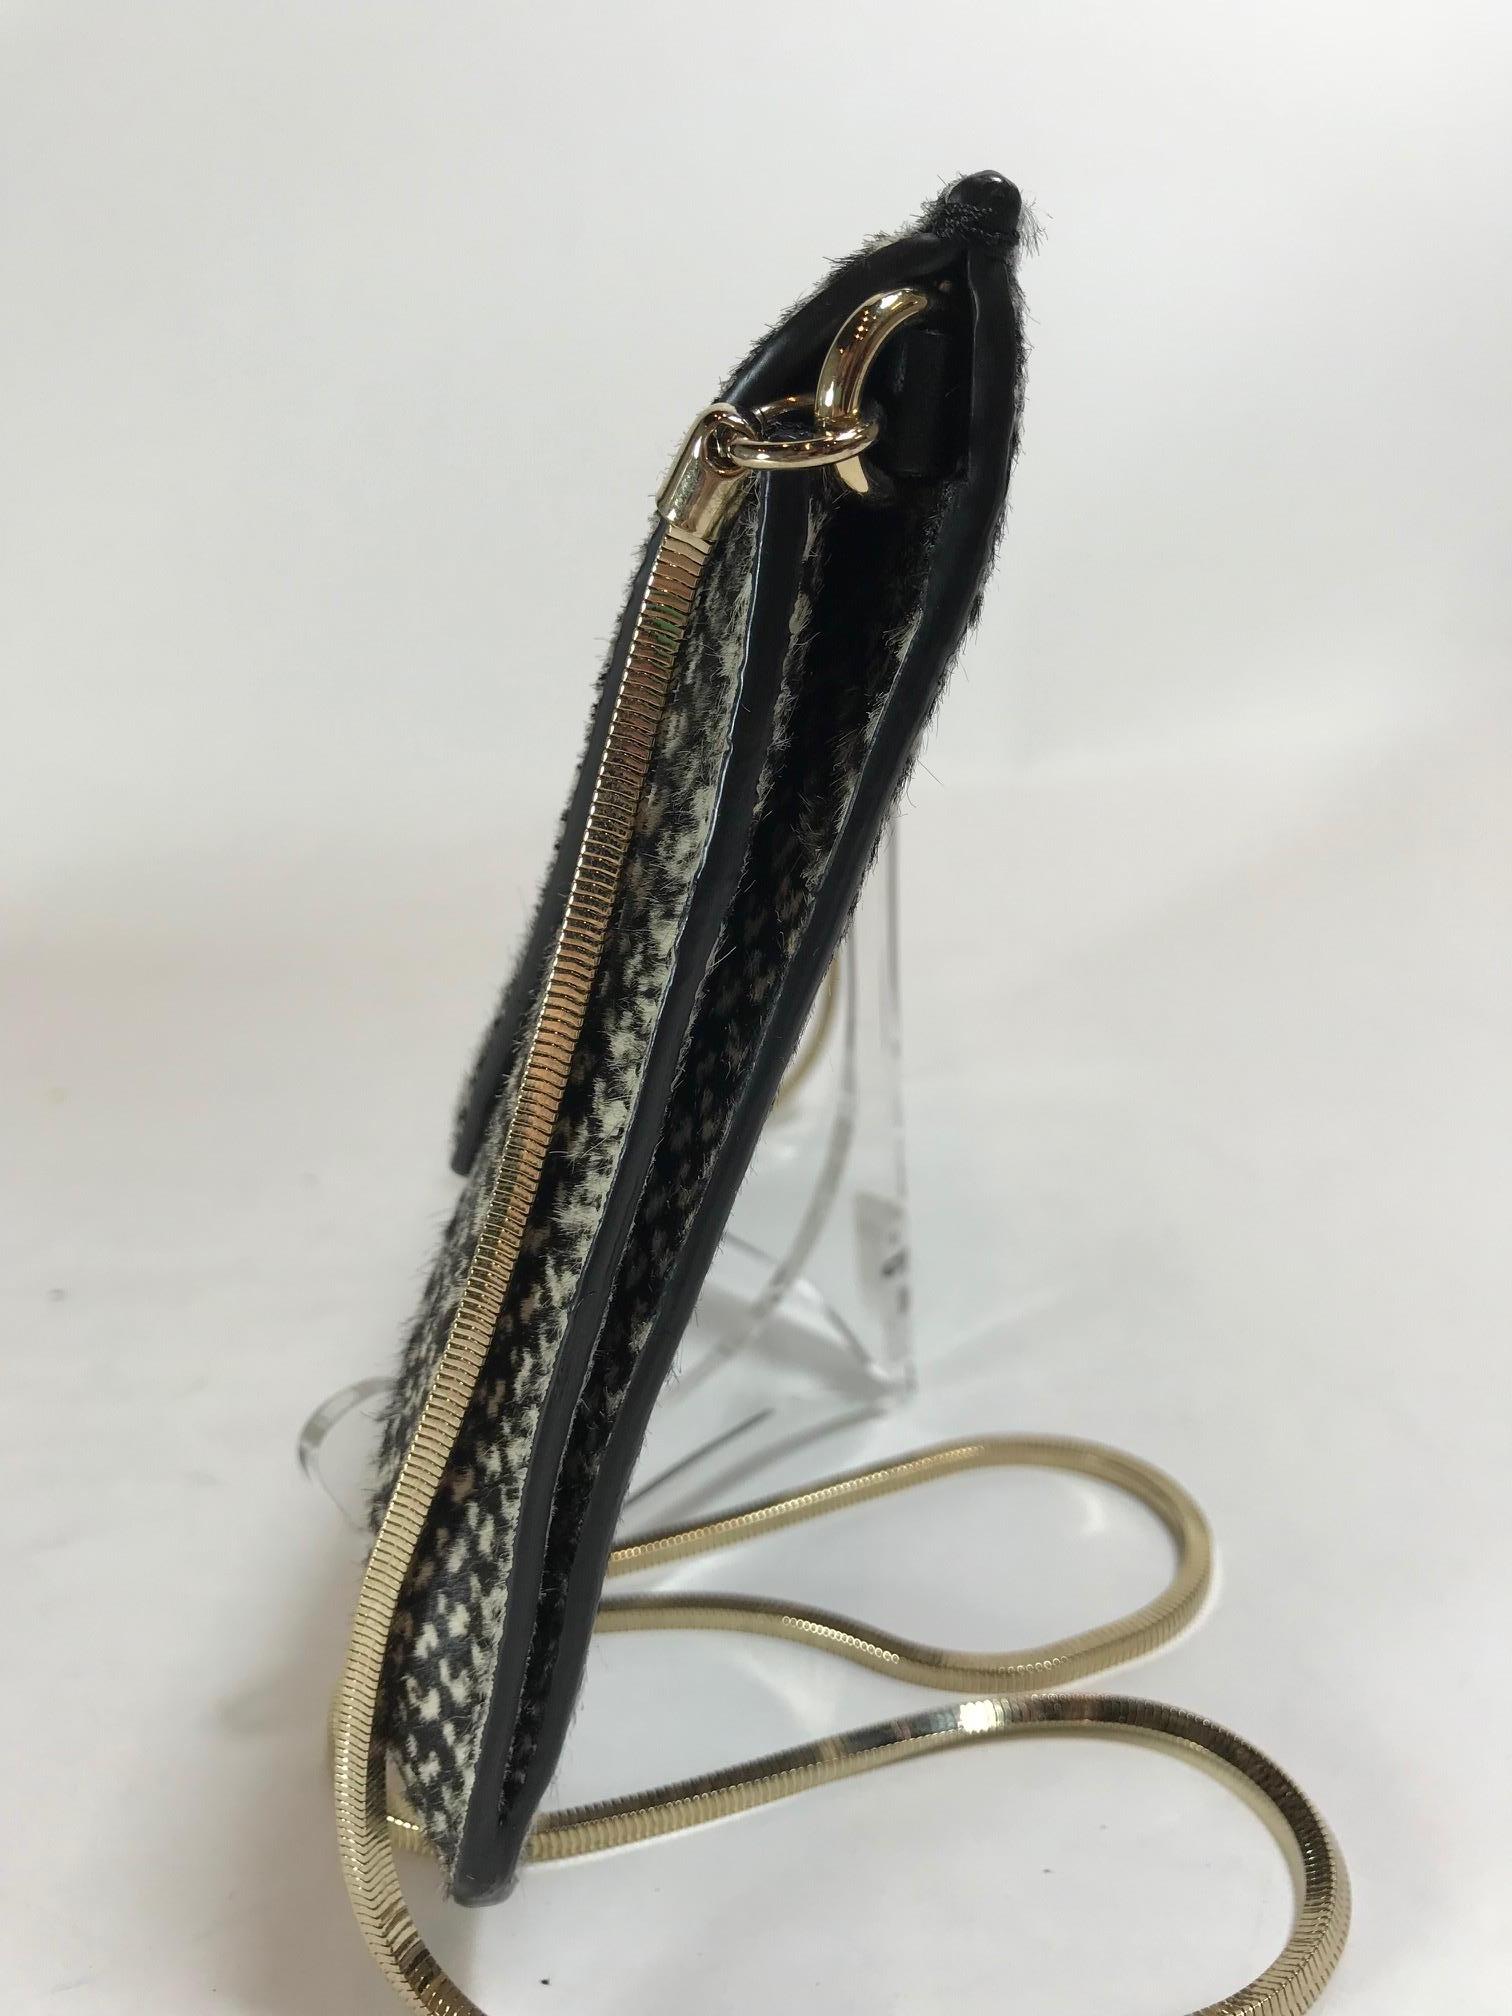 Lanvin Ponyhair Envelope Clutch In Excellent Condition For Sale In Roslyn, NY